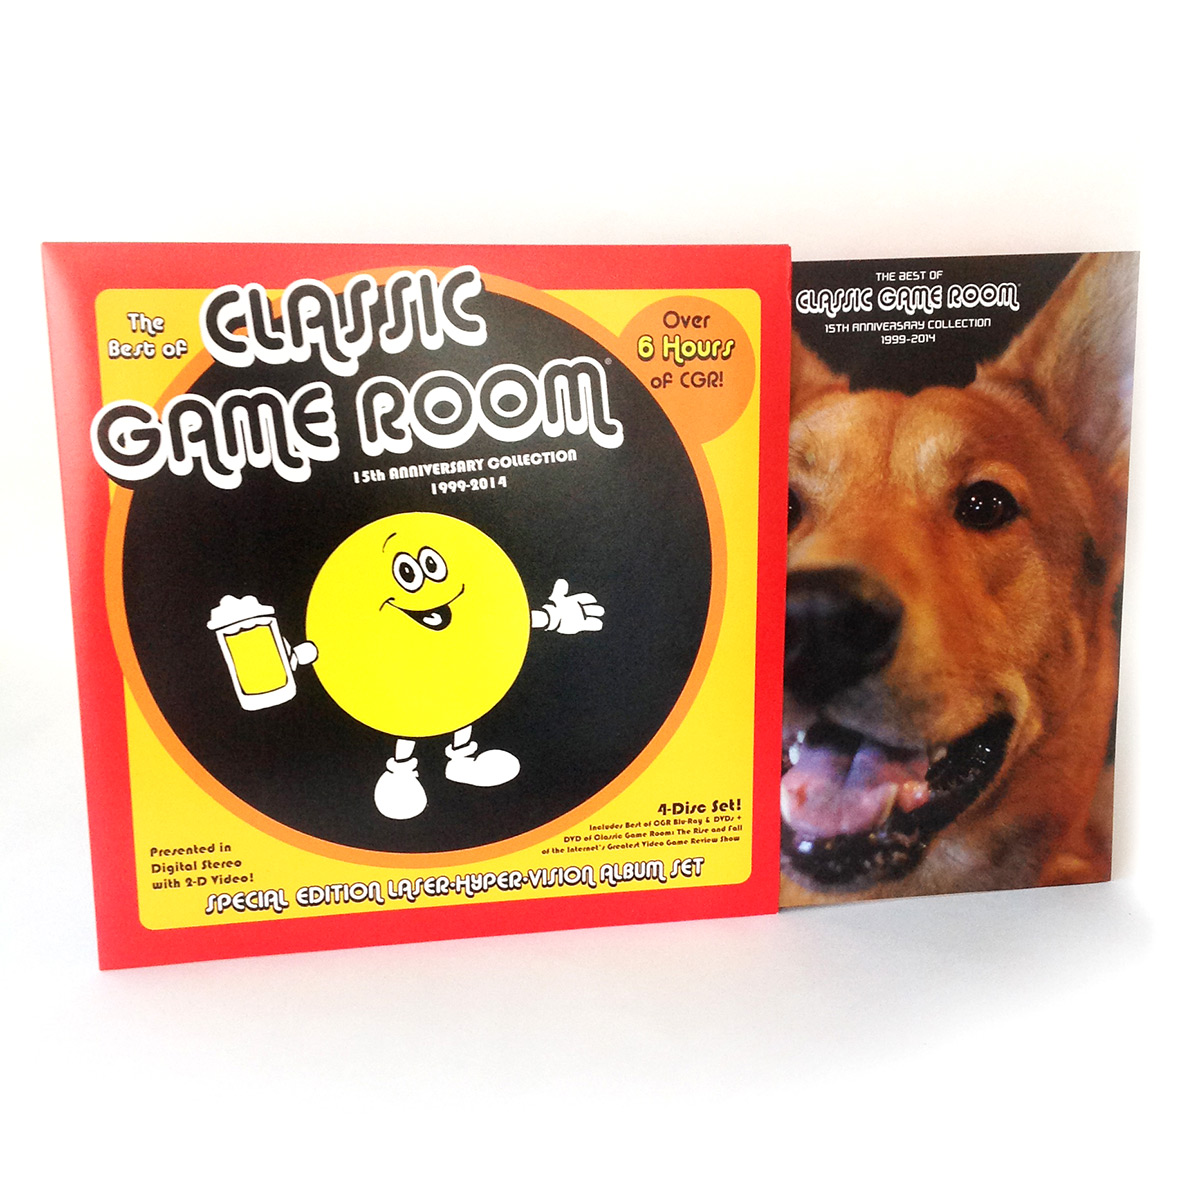 Classic Game Room - DVD Sleeve Packaging